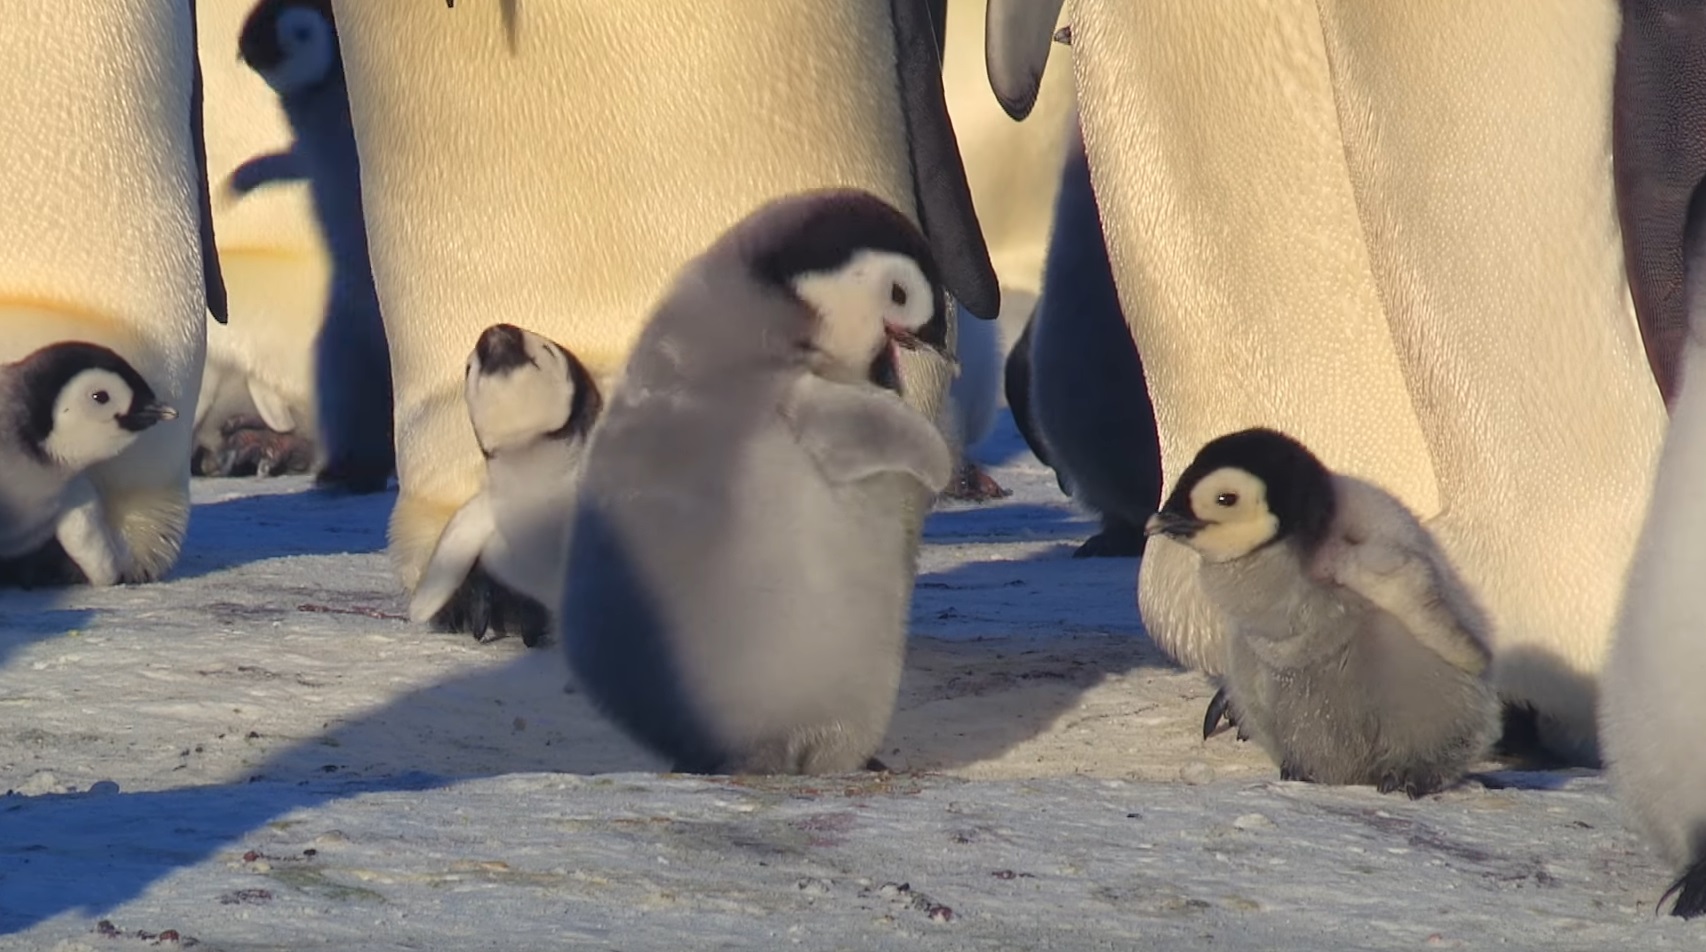 Cute Penguin Chick Tries To Make Friends